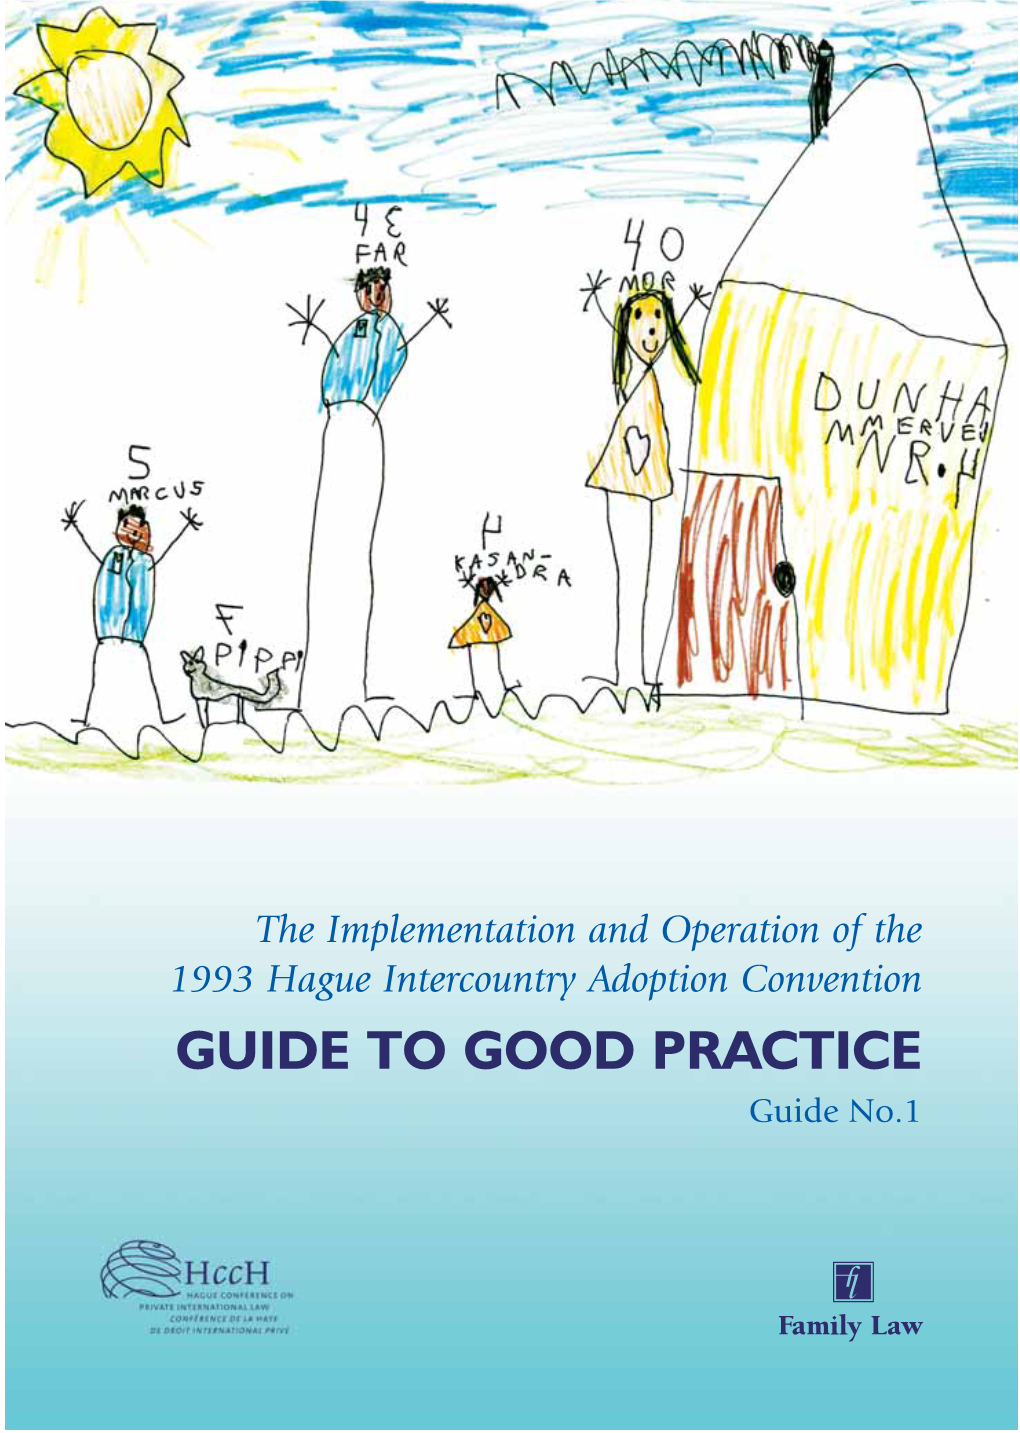 Guide to Good Practice No 1